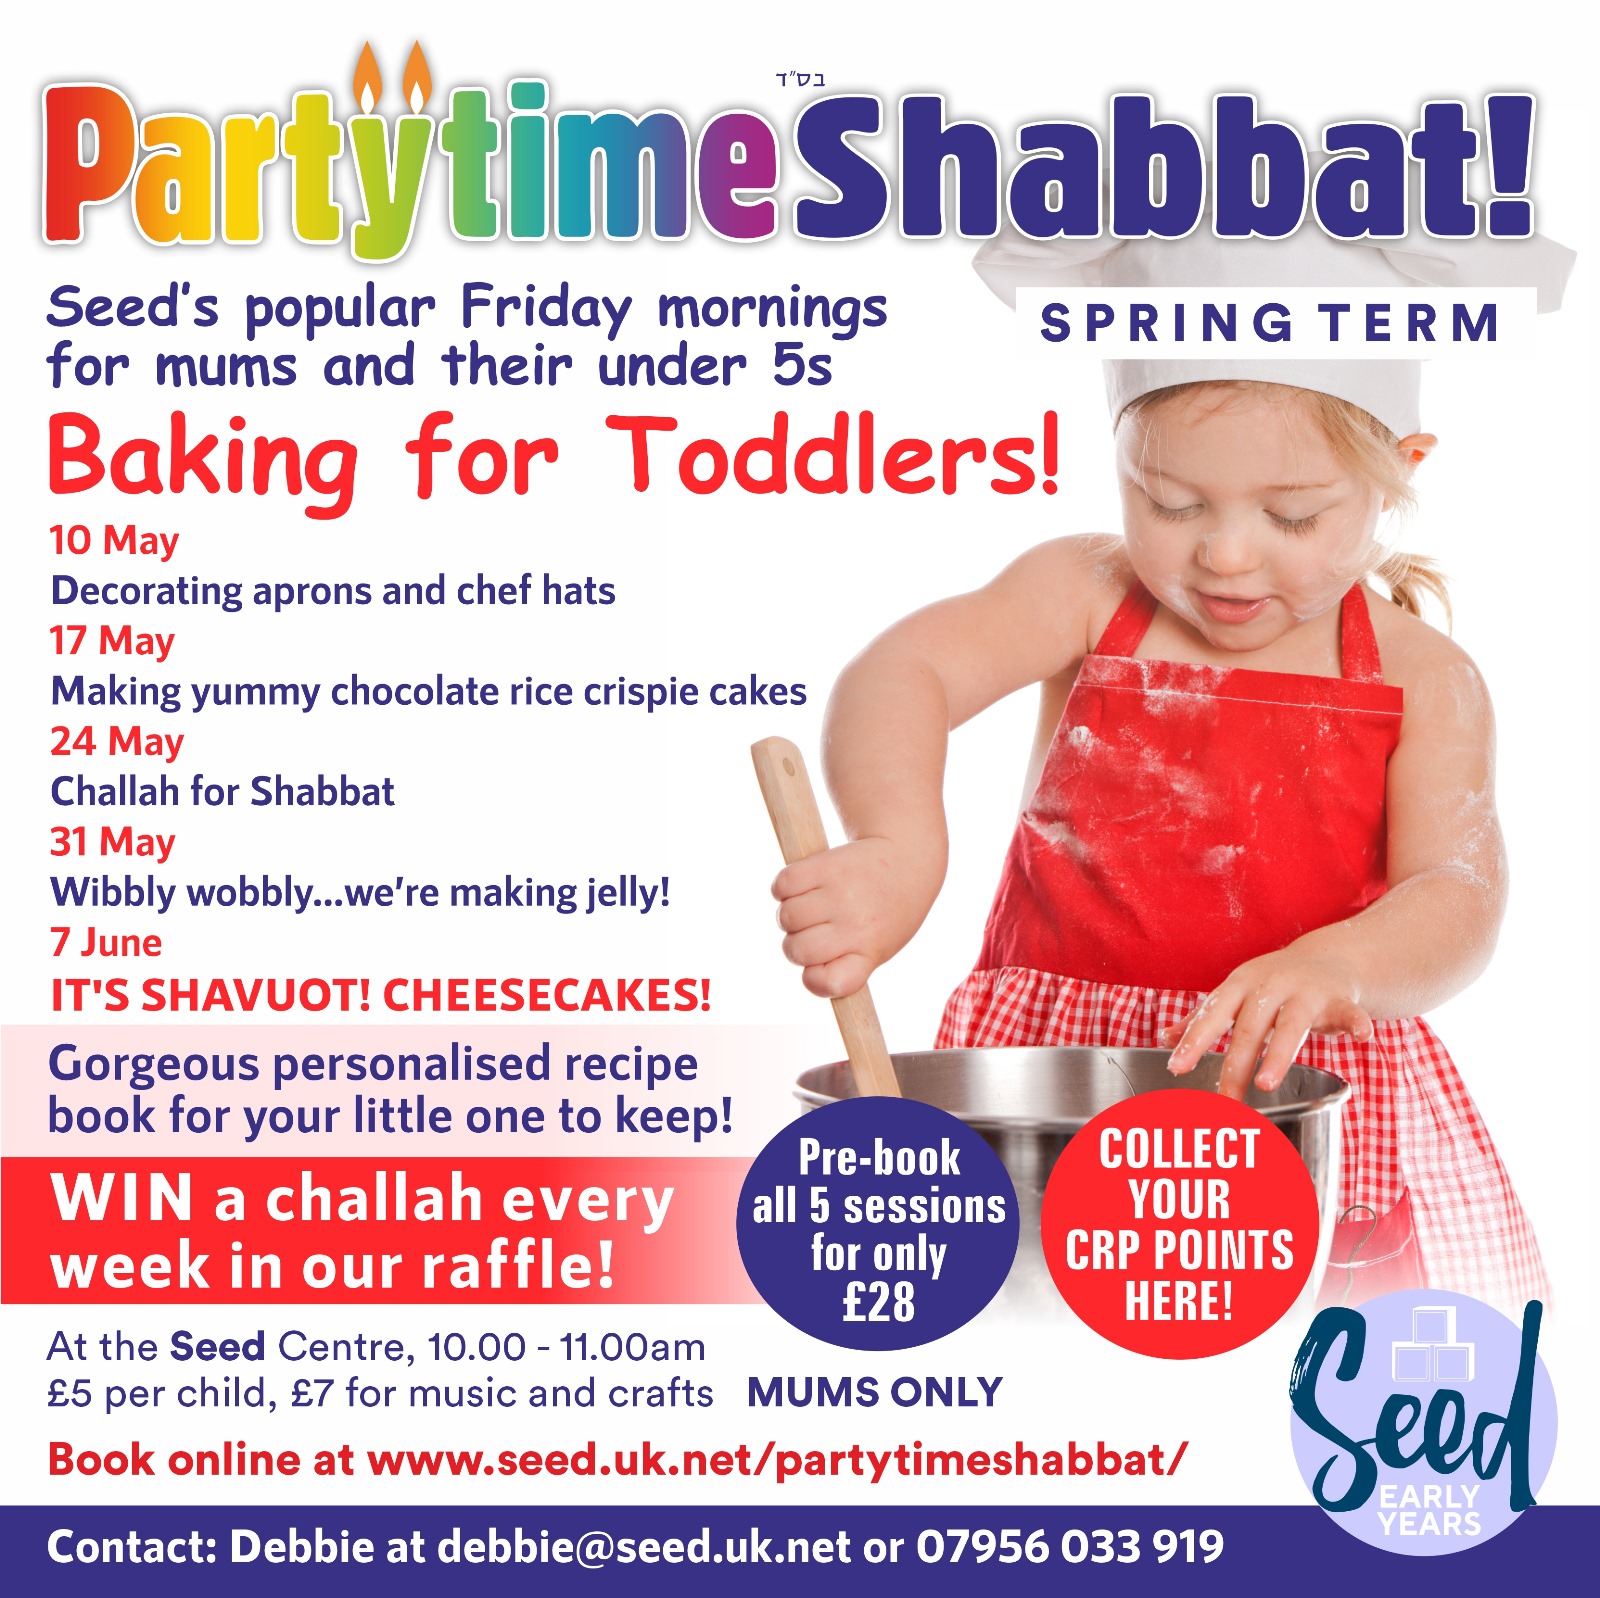 You are currently viewing Partytime Shabbat – Spring Term – Baking for Toddlers!